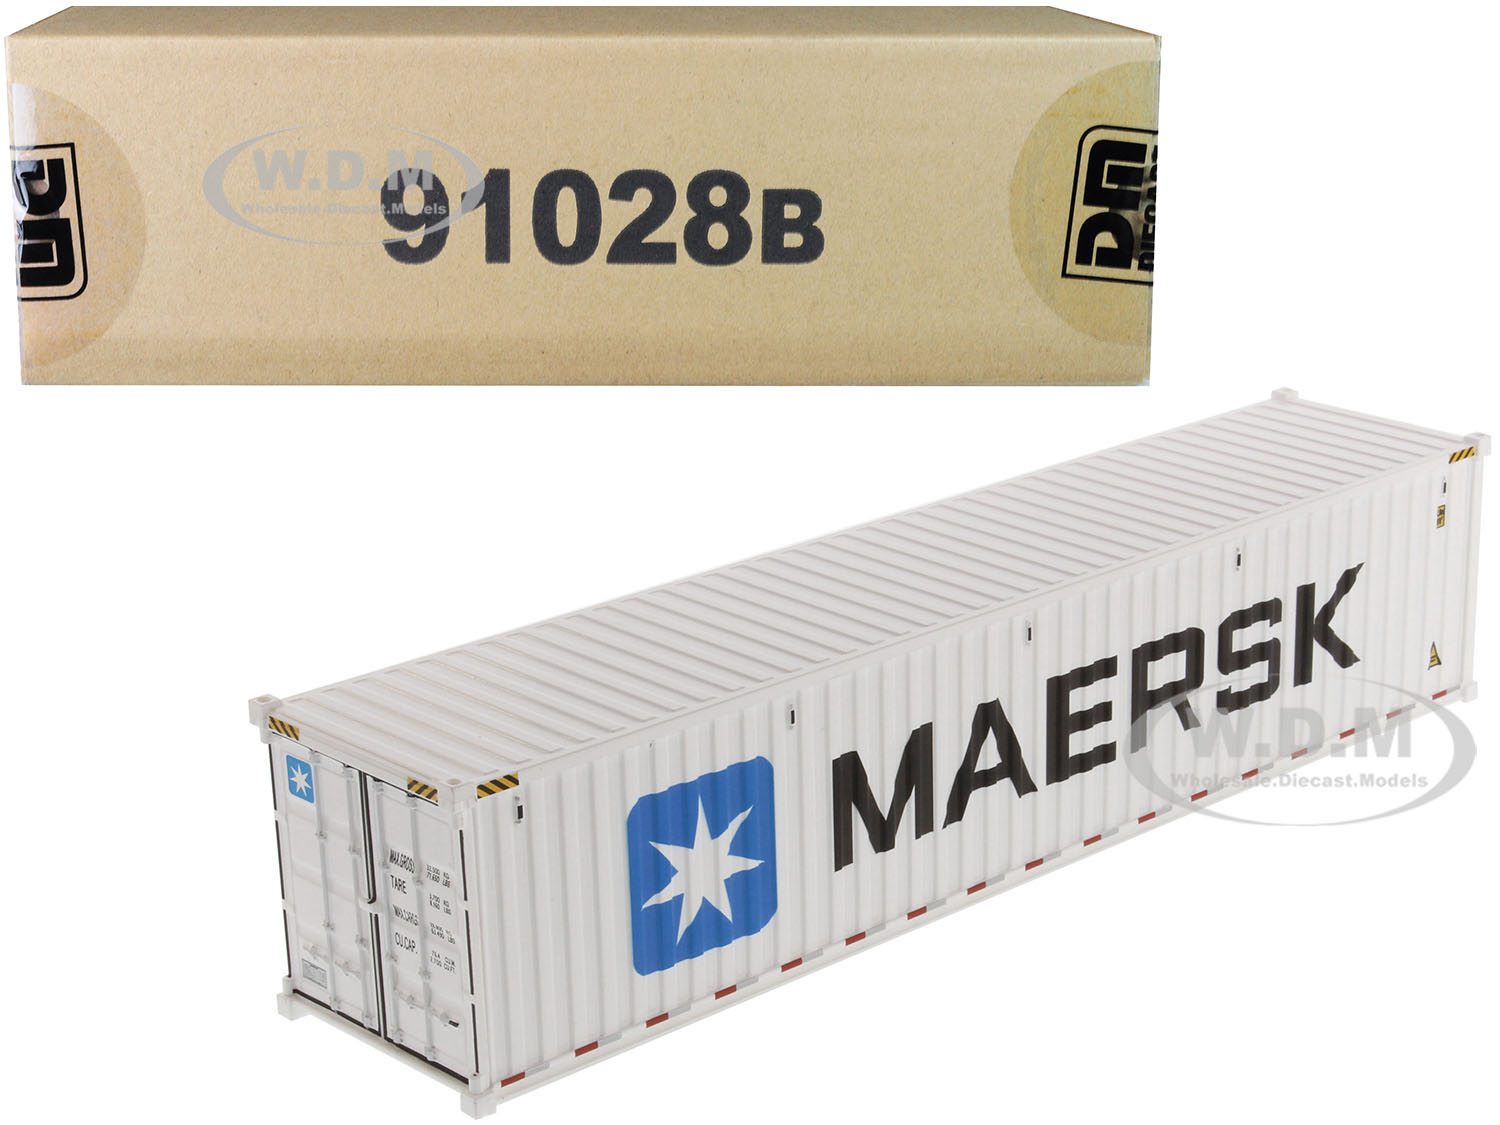 40 Refrigerated Sea Container "maersk" White "transport Series" 1/50 Model By Diecast Masters